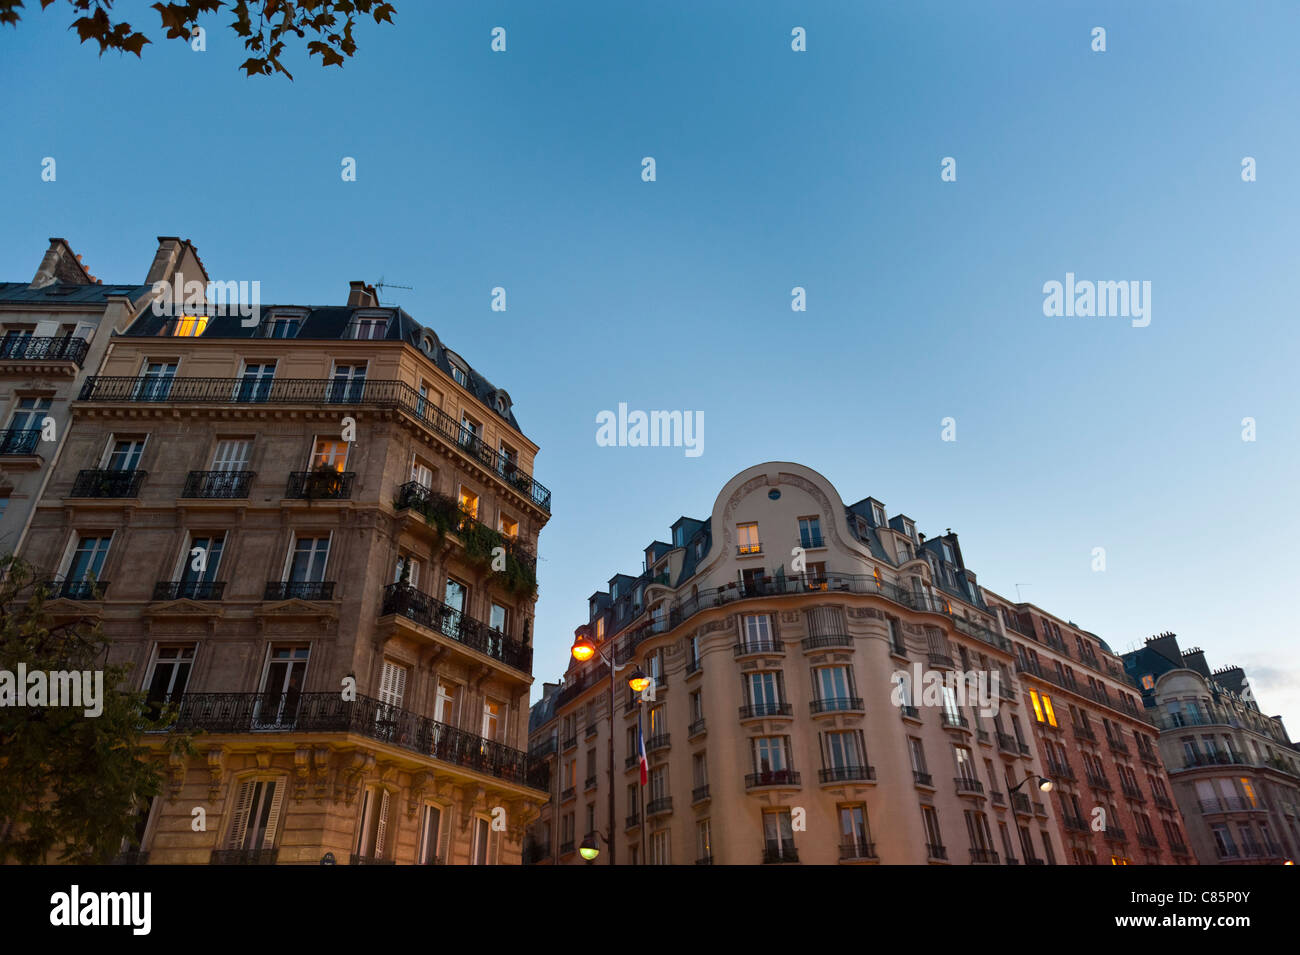 Houses of St. Michel, Paris by night Stock Photo